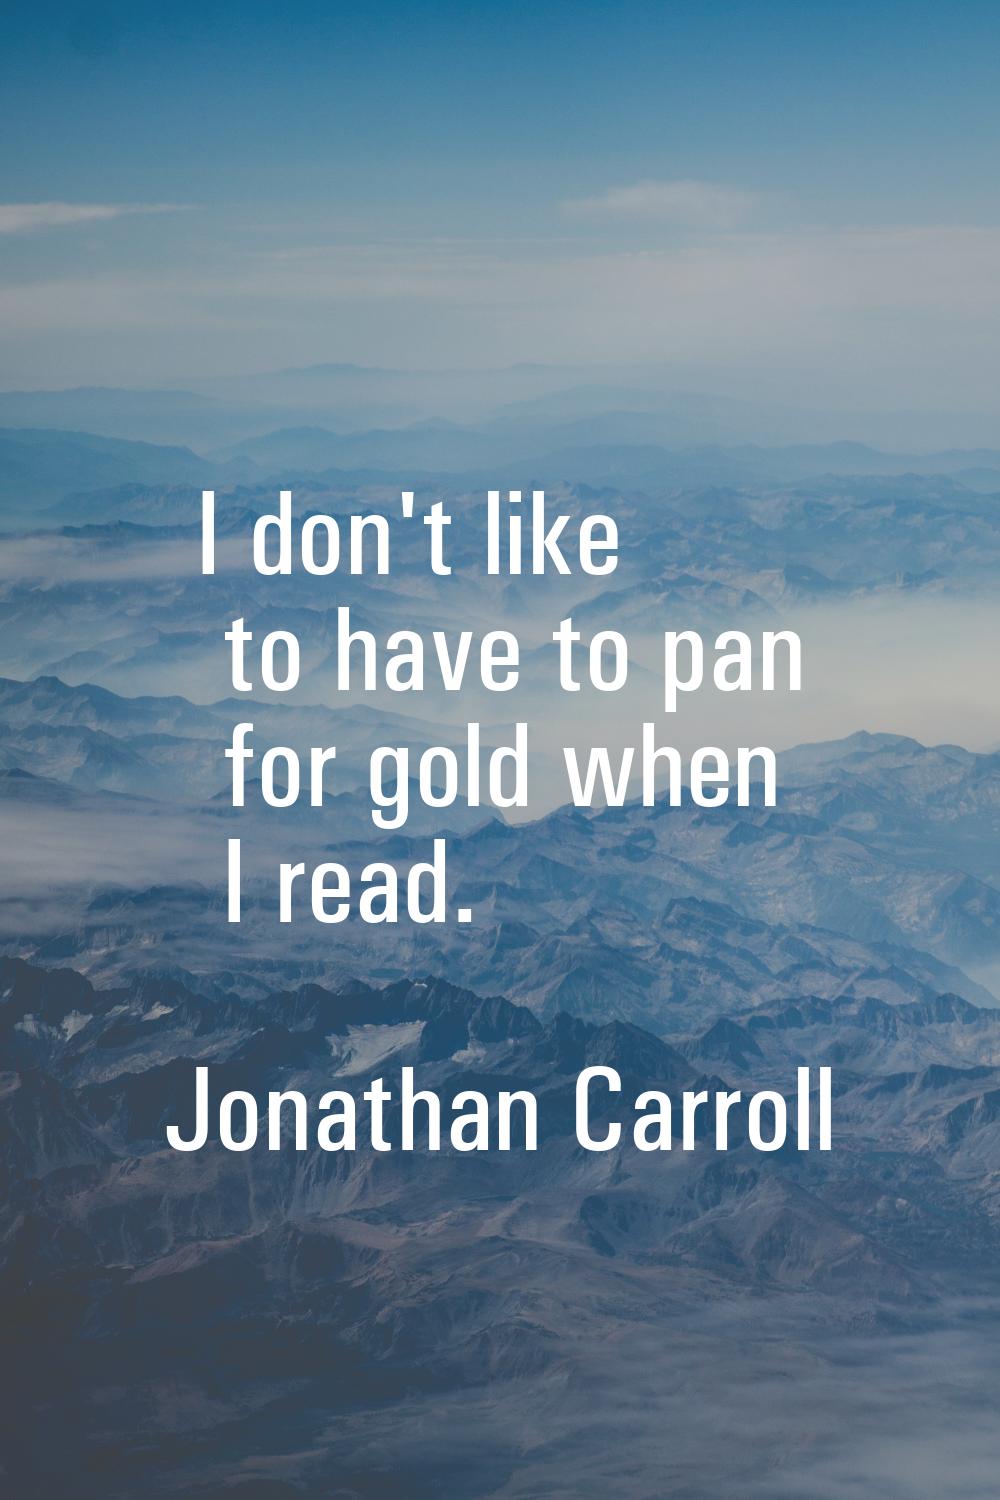 I don't like to have to pan for gold when I read.